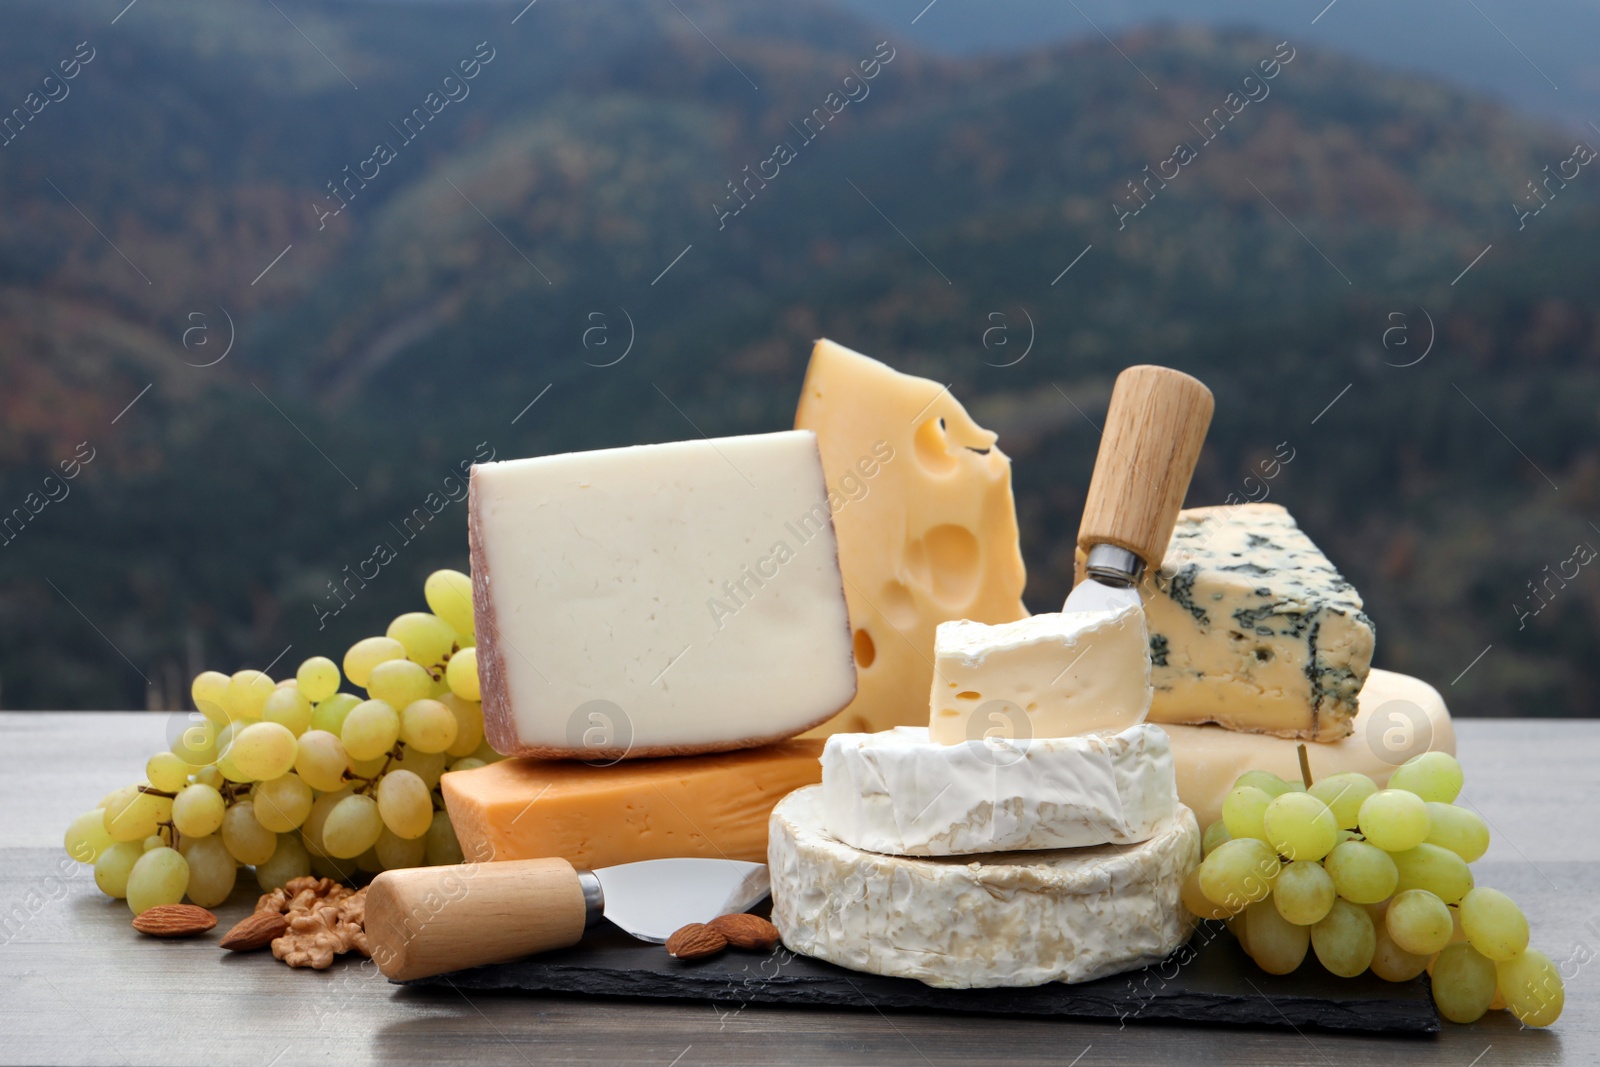 Photo of Different types of delicious cheeses and snacks on wooden table against mountain landscape